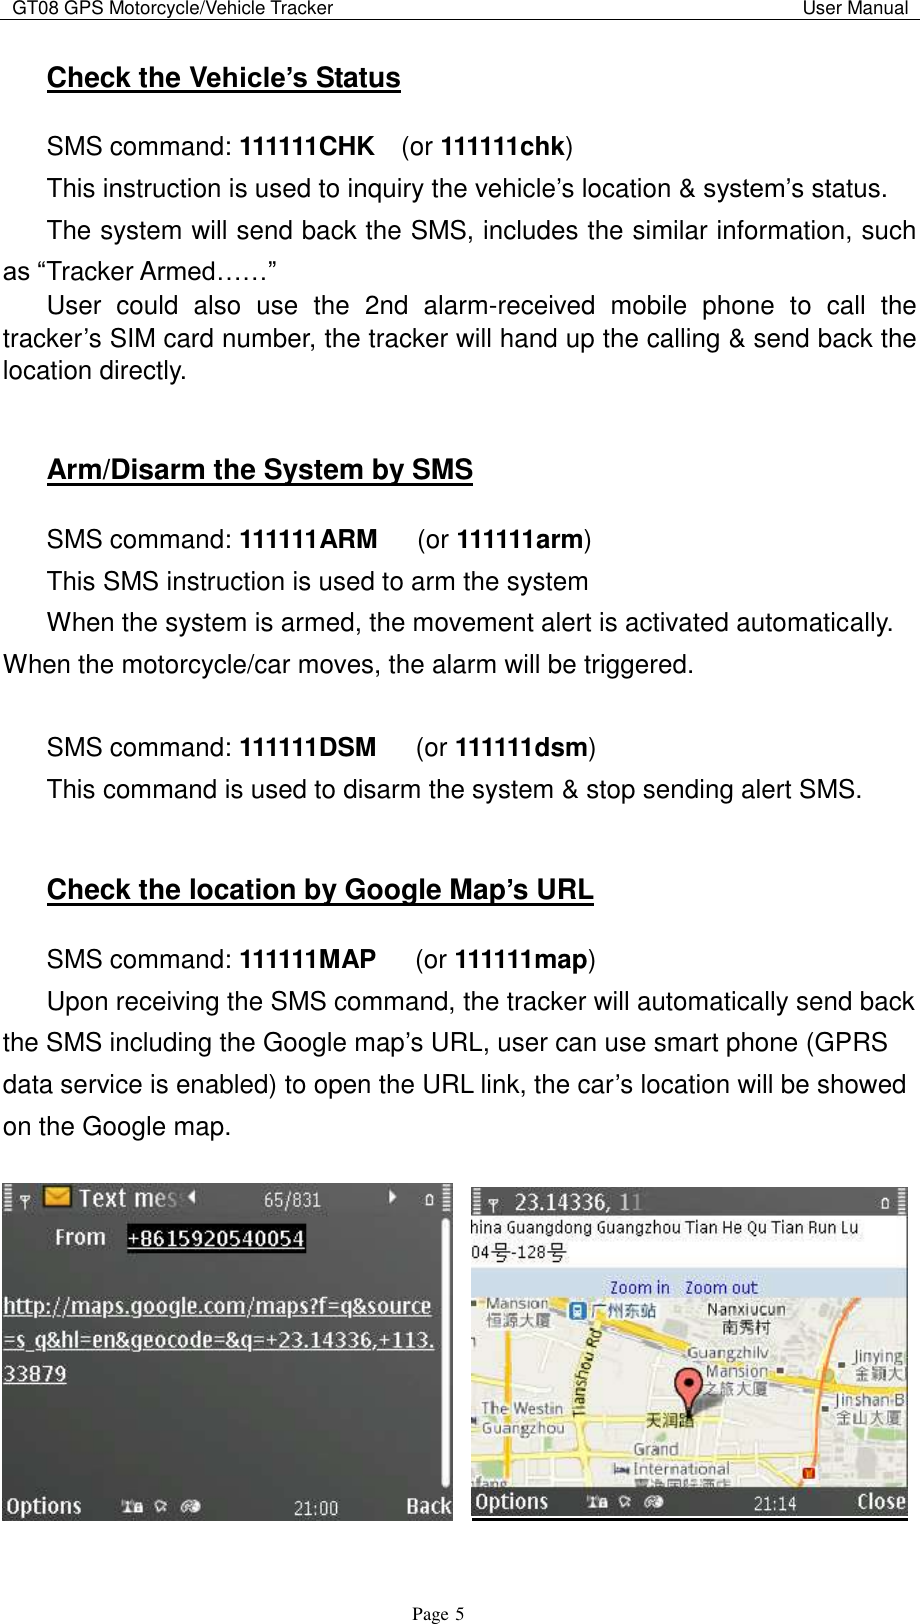 GT08 GPS Motorcycle/Vehicle Tracker                                                                                           User Manual                                     Page   5 Check the Vehicle’s Status SMS command: 111111CHK  (or 111111chk) This instruction is used to inquiry the vehicle‟s location &amp; system‟s status. The system will send back the SMS, includes the similar information, such as “Tracker Armed……”   User  could  also  use  the 2nd alarm-received  mobile  phone  to  call  the tracker‟s SIM card number, the tracker will hand up the calling &amp; send back the   location directly.  Arm/Disarm the System by SMS SMS command: 111111ARM    (or 111111arm) This SMS instruction is used to arm the system When the system is armed, the movement alert is activated automatically. When the motorcycle/car moves, the alarm will be triggered.  SMS command: 111111DSM    (or 111111dsm) This command is used to disarm the system &amp; stop sending alert SMS.  Check the location by Google Map’s URL SMS command: 111111MAP      (or 111111map) Upon receiving the SMS command, the tracker will automatically send back the SMS including the Google map‟s URL, user can use smart phone (GPRS data service is enabled) to open the URL link, the car‟s location will be showed on the Google map.   